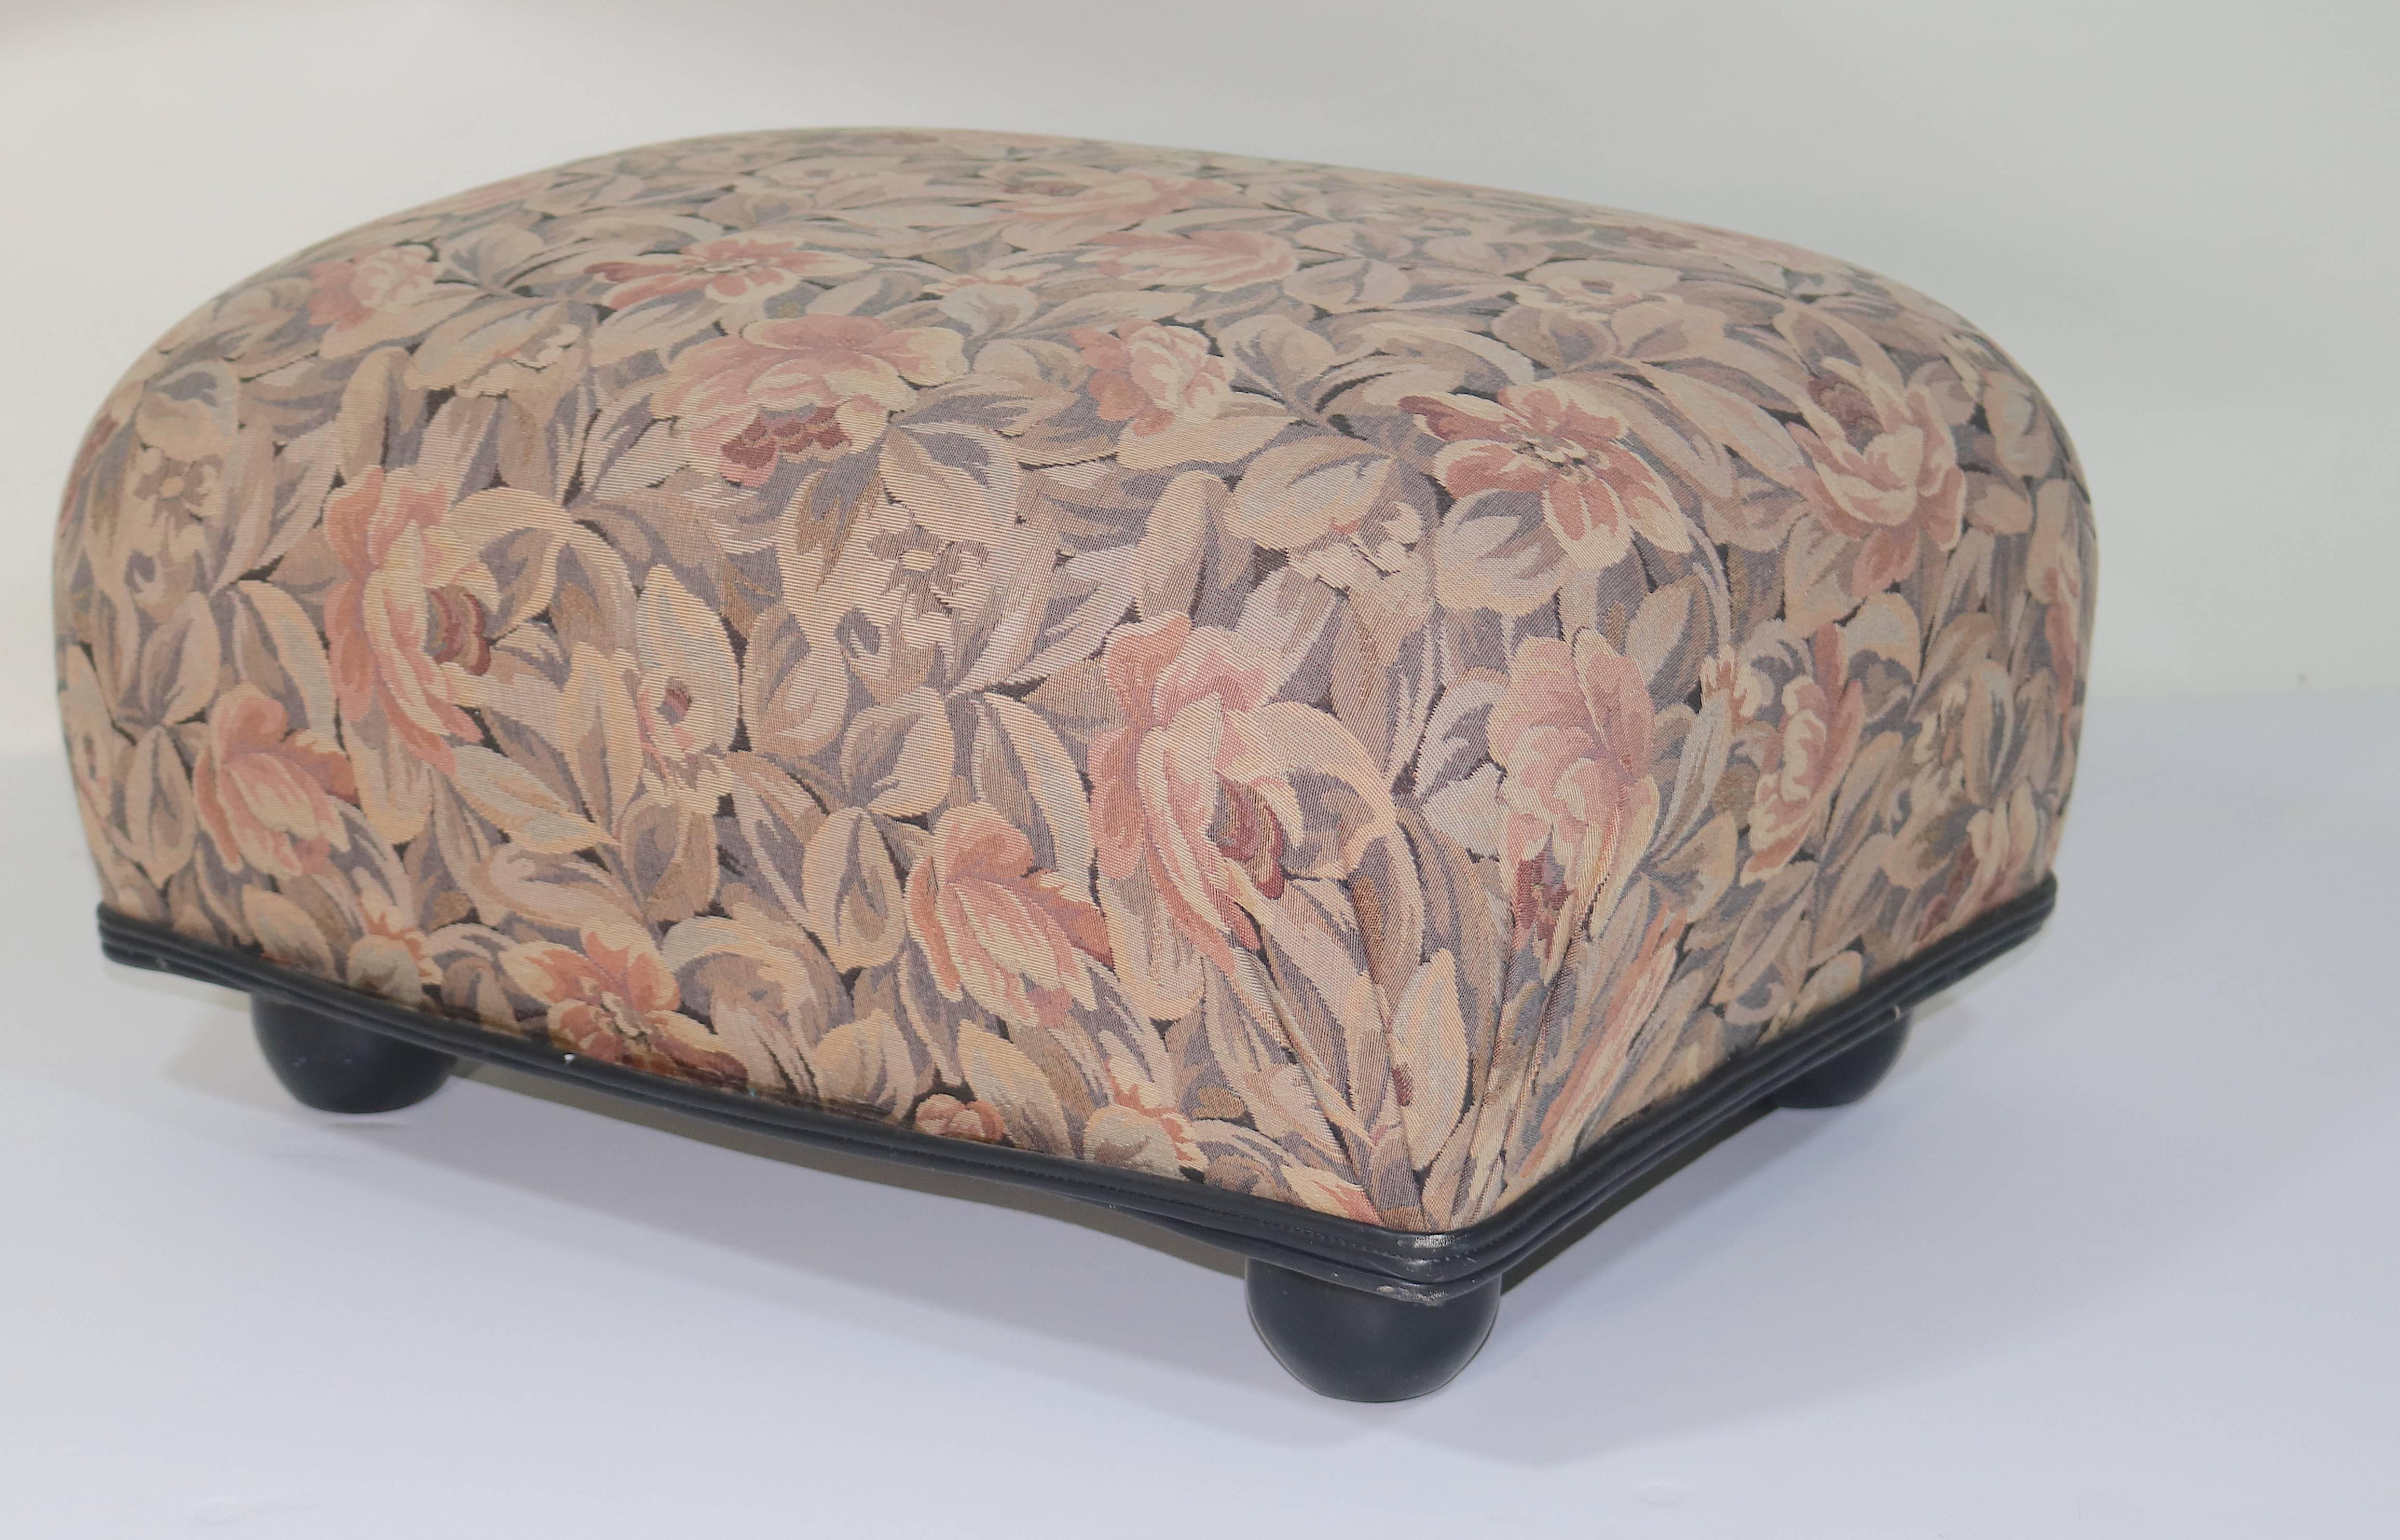 Pair of Ottoman/ Foot Stools Designed by Mars and Ronn Jaffe in a Floral Tapestry Woven Linen Upholstery, with Black Leather Double Welt Trim and Bun Feet. circa 1980

Noted artist and designer Ronn Jaffe's work has been created for clients such as